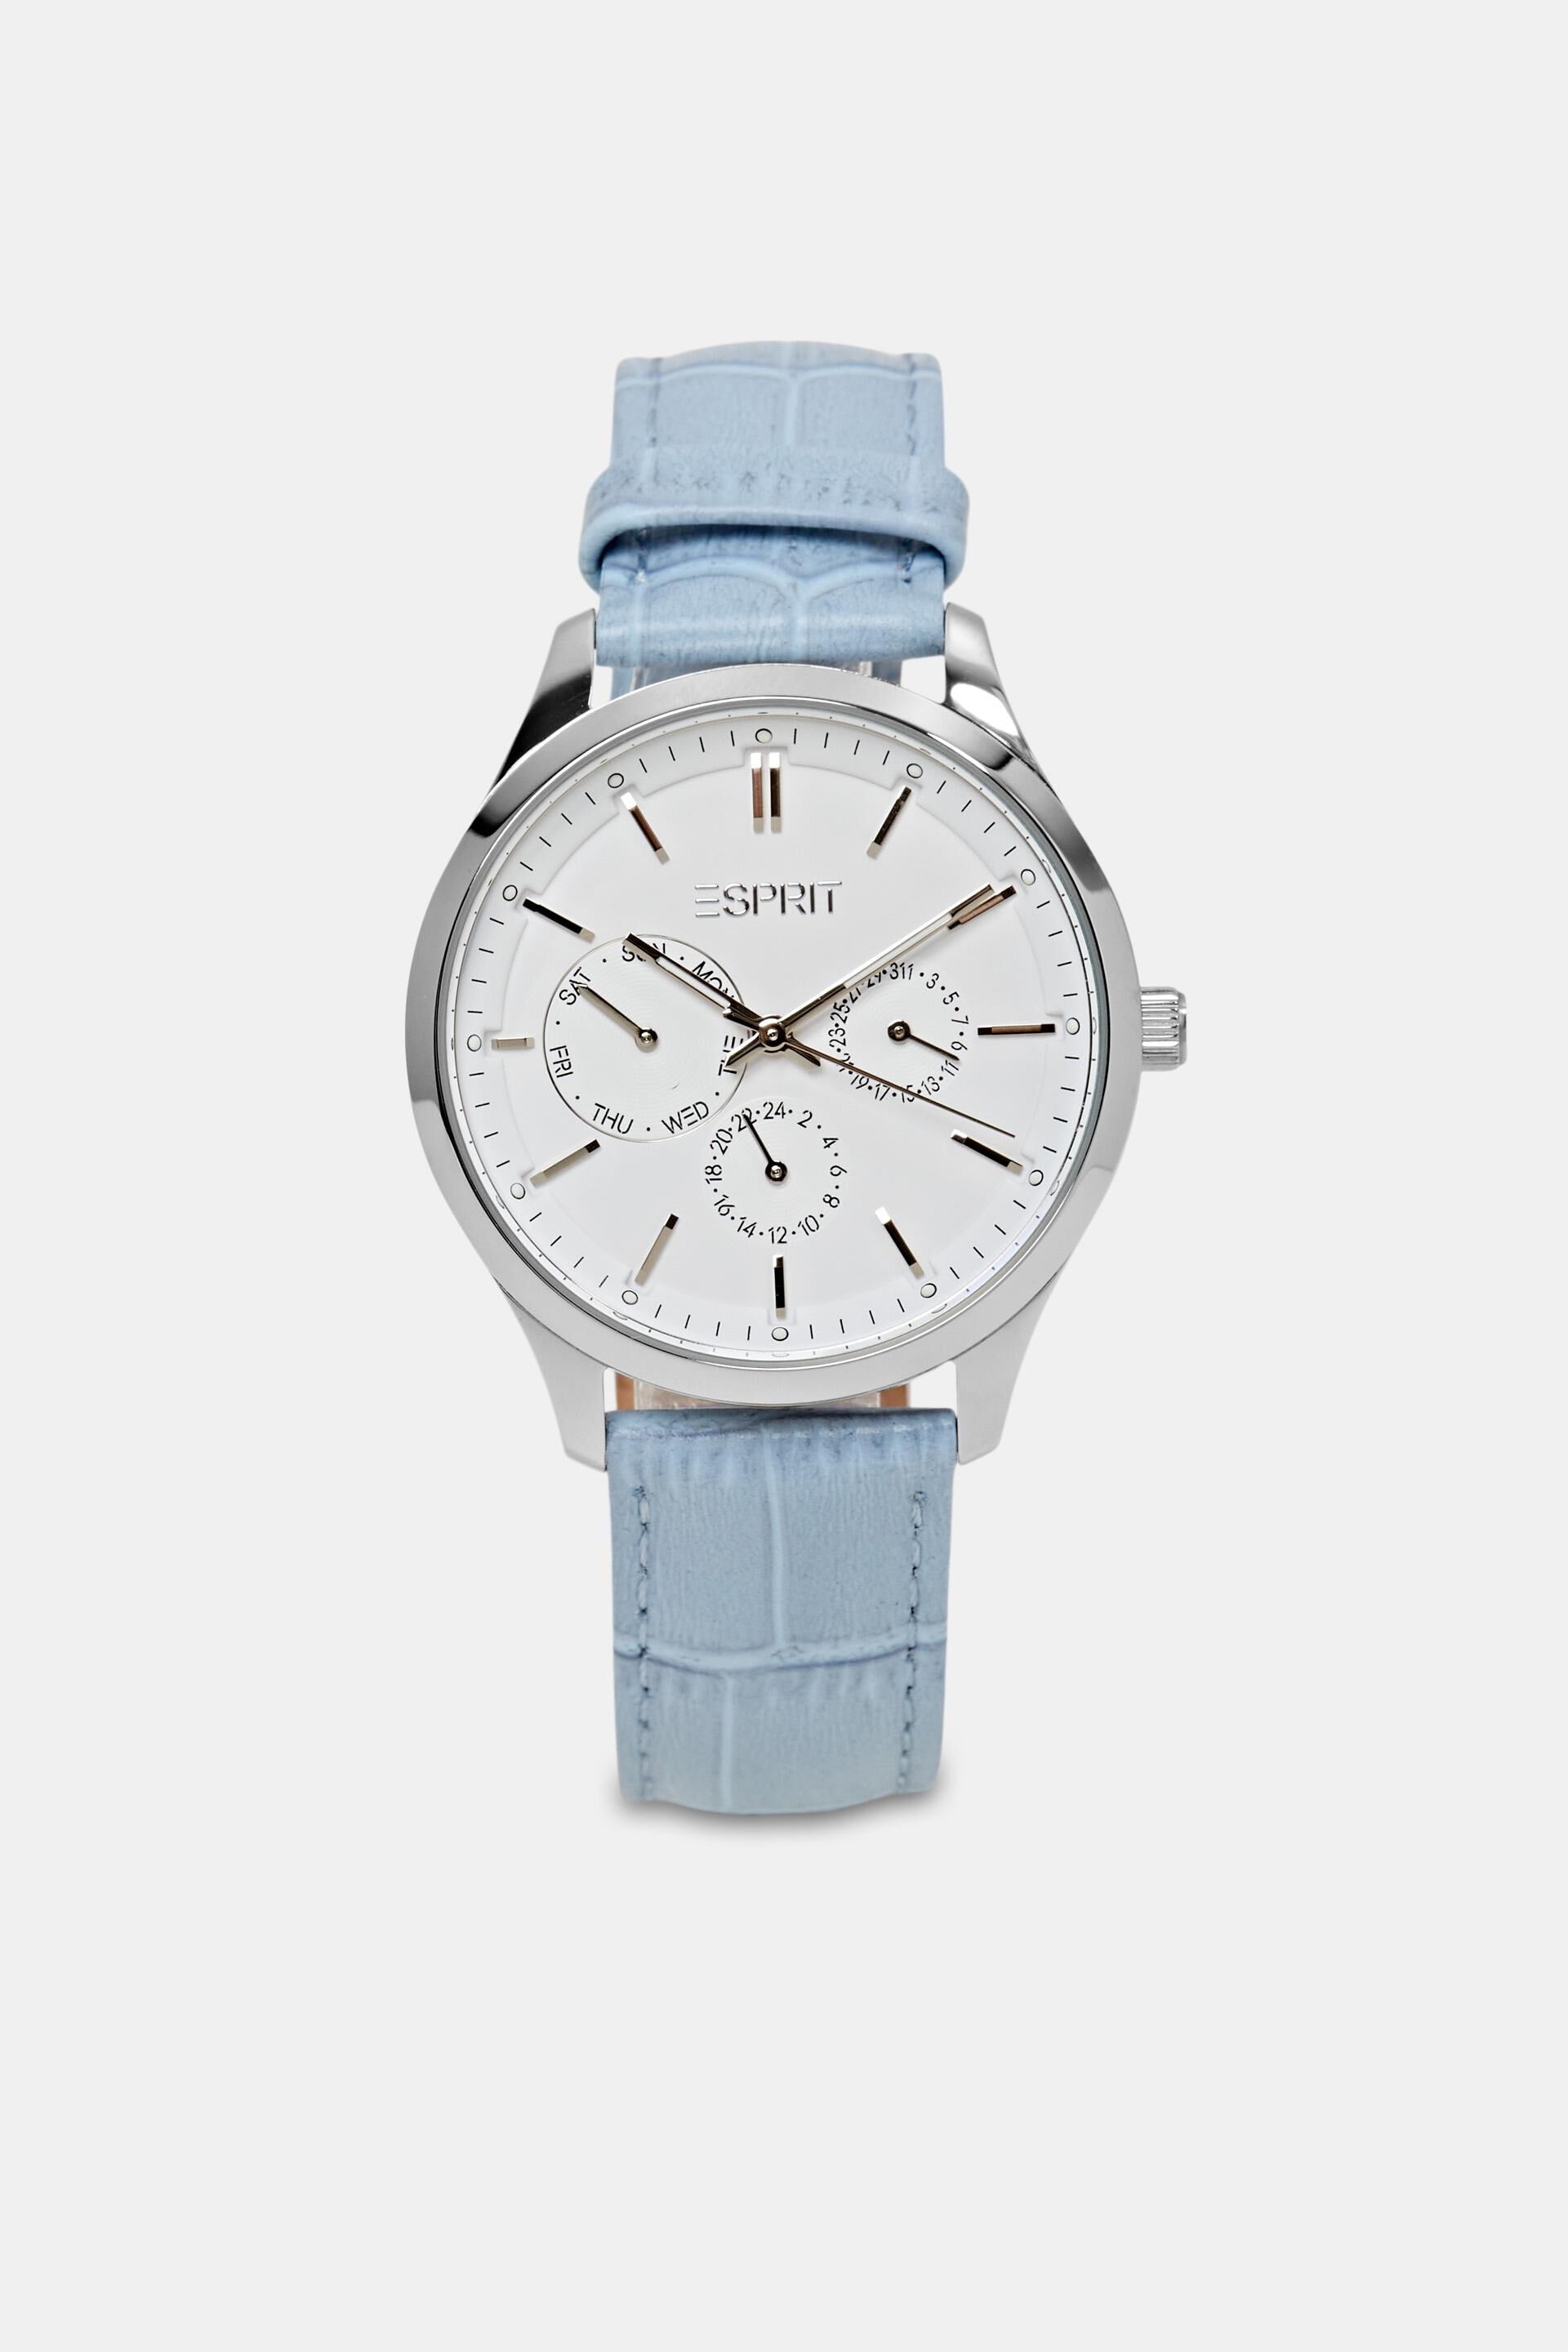 Esprit leather a with Multi-functional strap watch